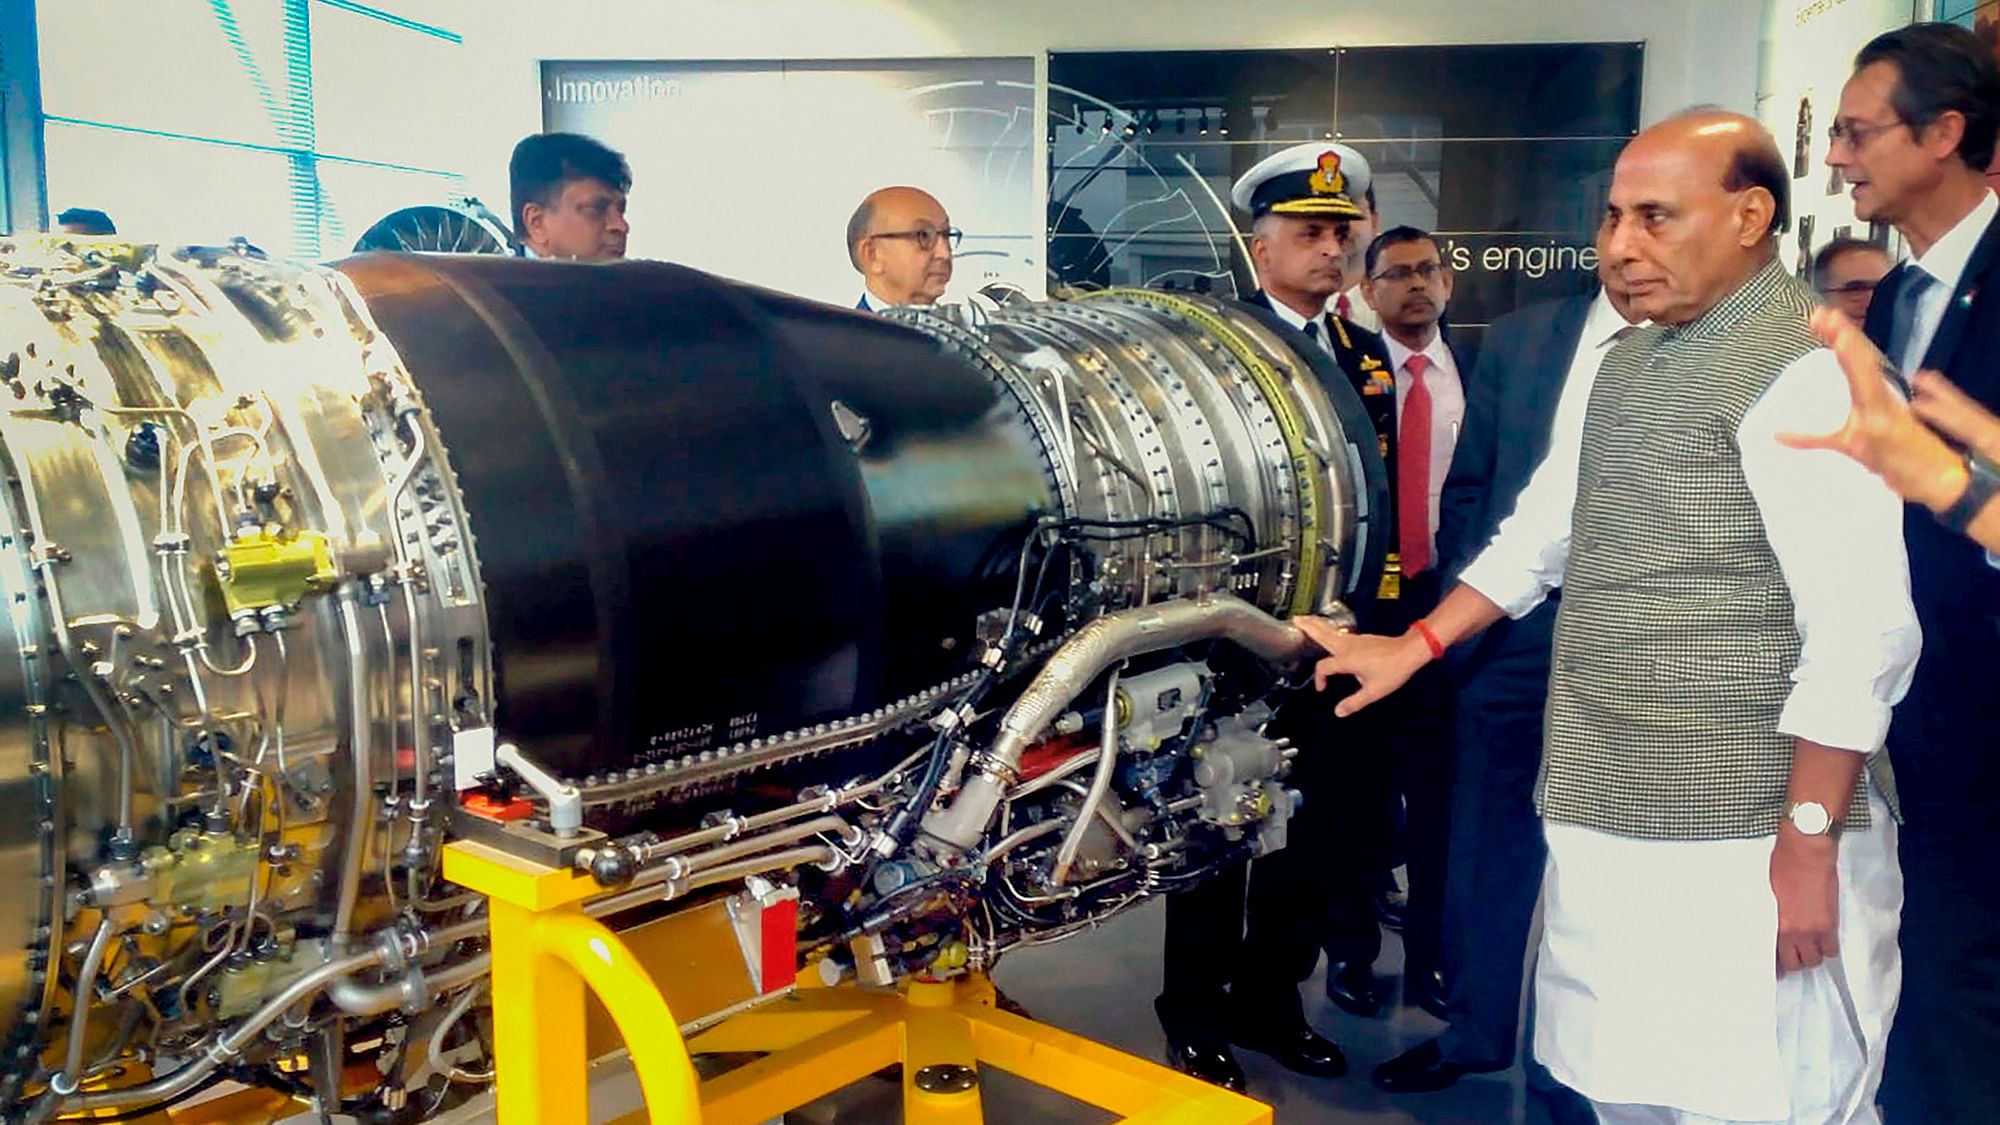 Defence Minister Rajnath Singh visits SAFRAN - the engine making facility for Rafale fighter jet, in Paris.